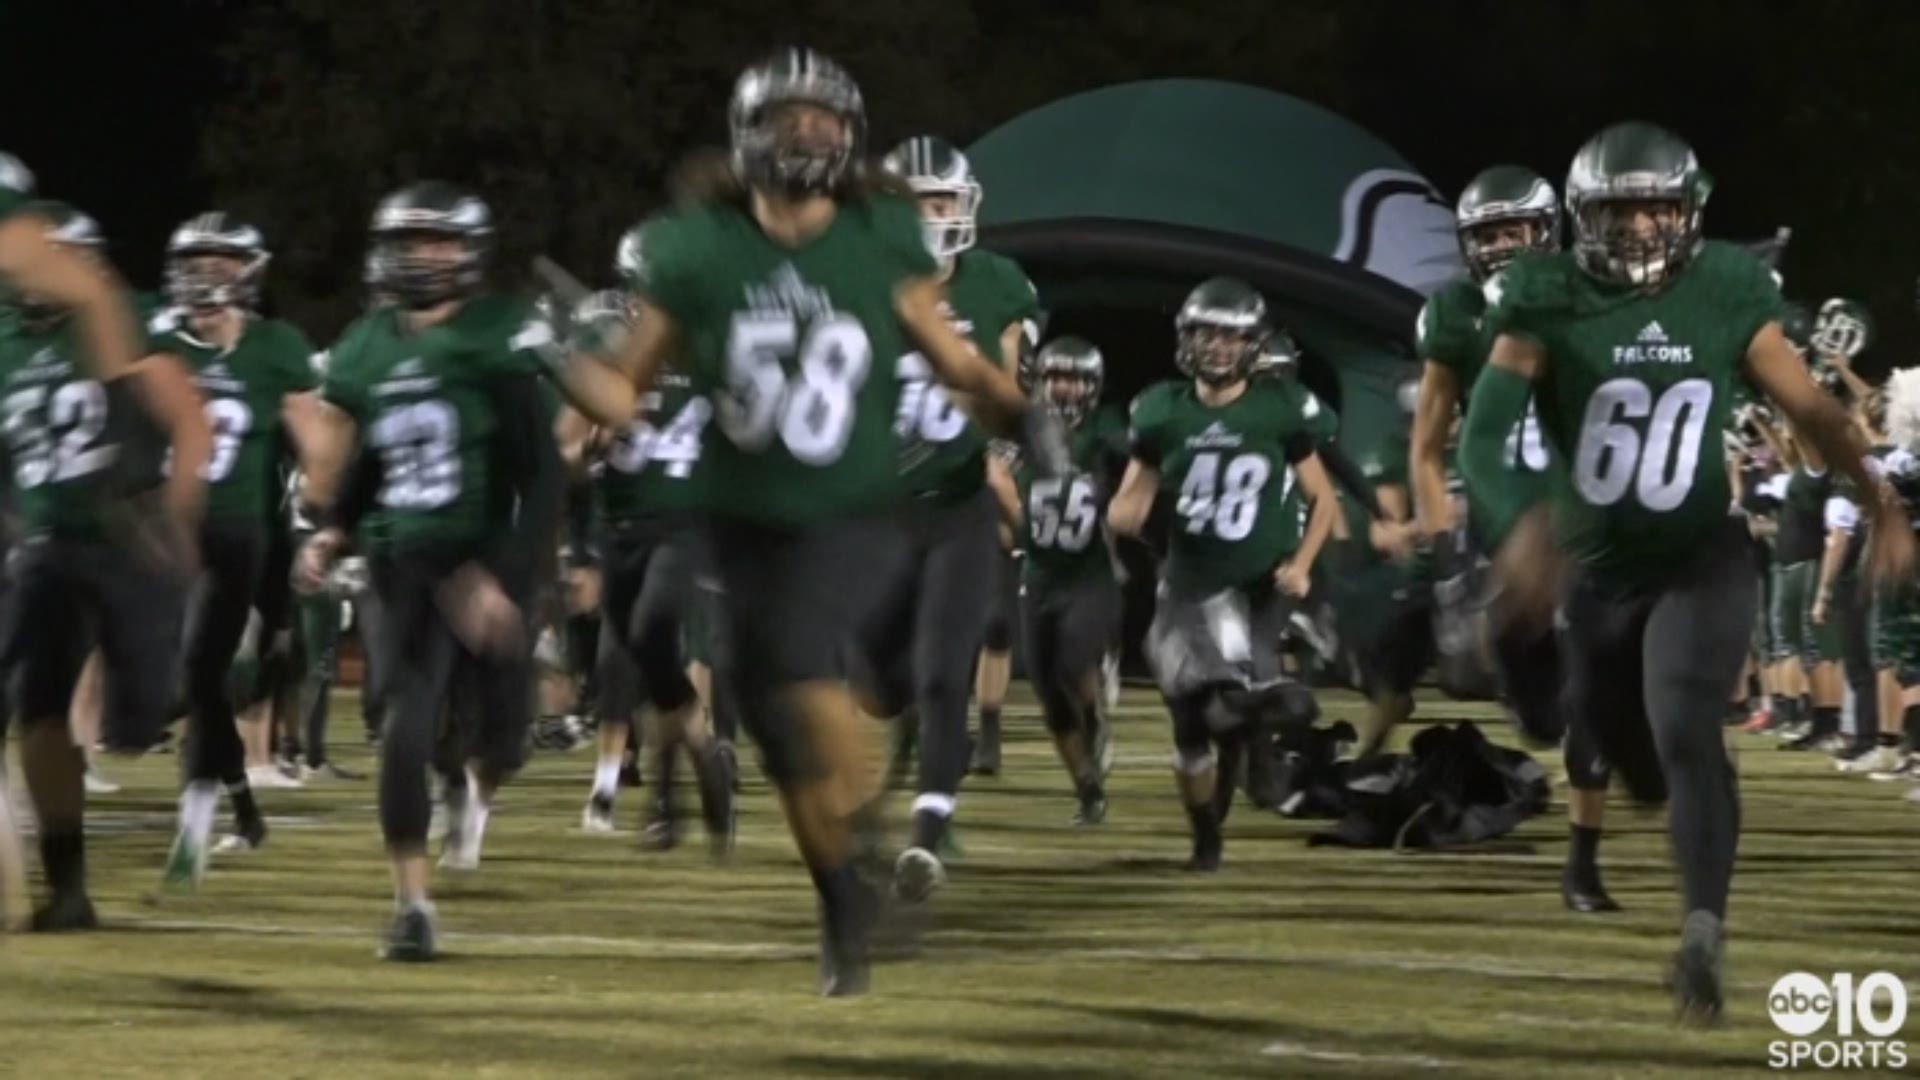 In the 2018 version of the River Bowl, it was the Colfax Falcons to walk away undefeated, as they handed their rivals, the Bear River Bruins, their first loss of the season.